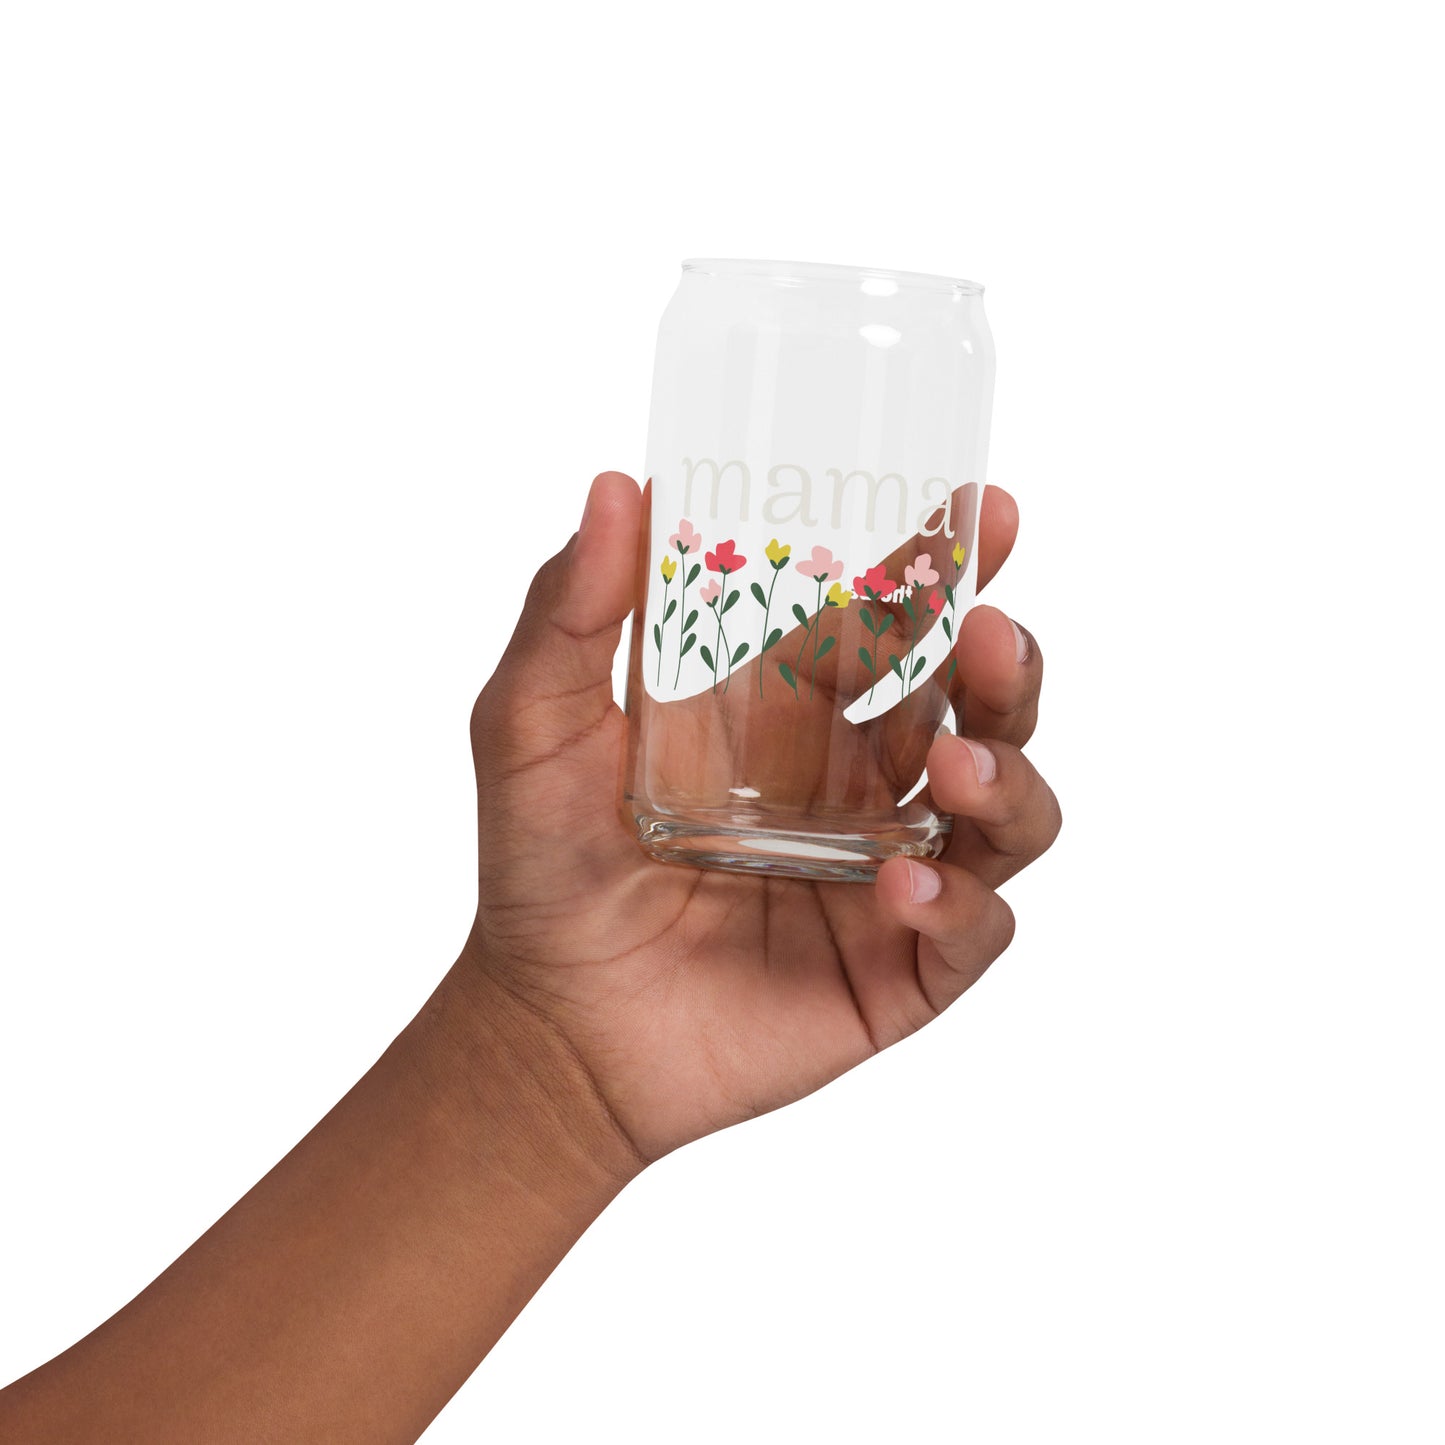 Mama - Can-Shaped Glass, by The Banannie Diaries - Volume: 16 oz. (473 ml), Glassware, Houseware